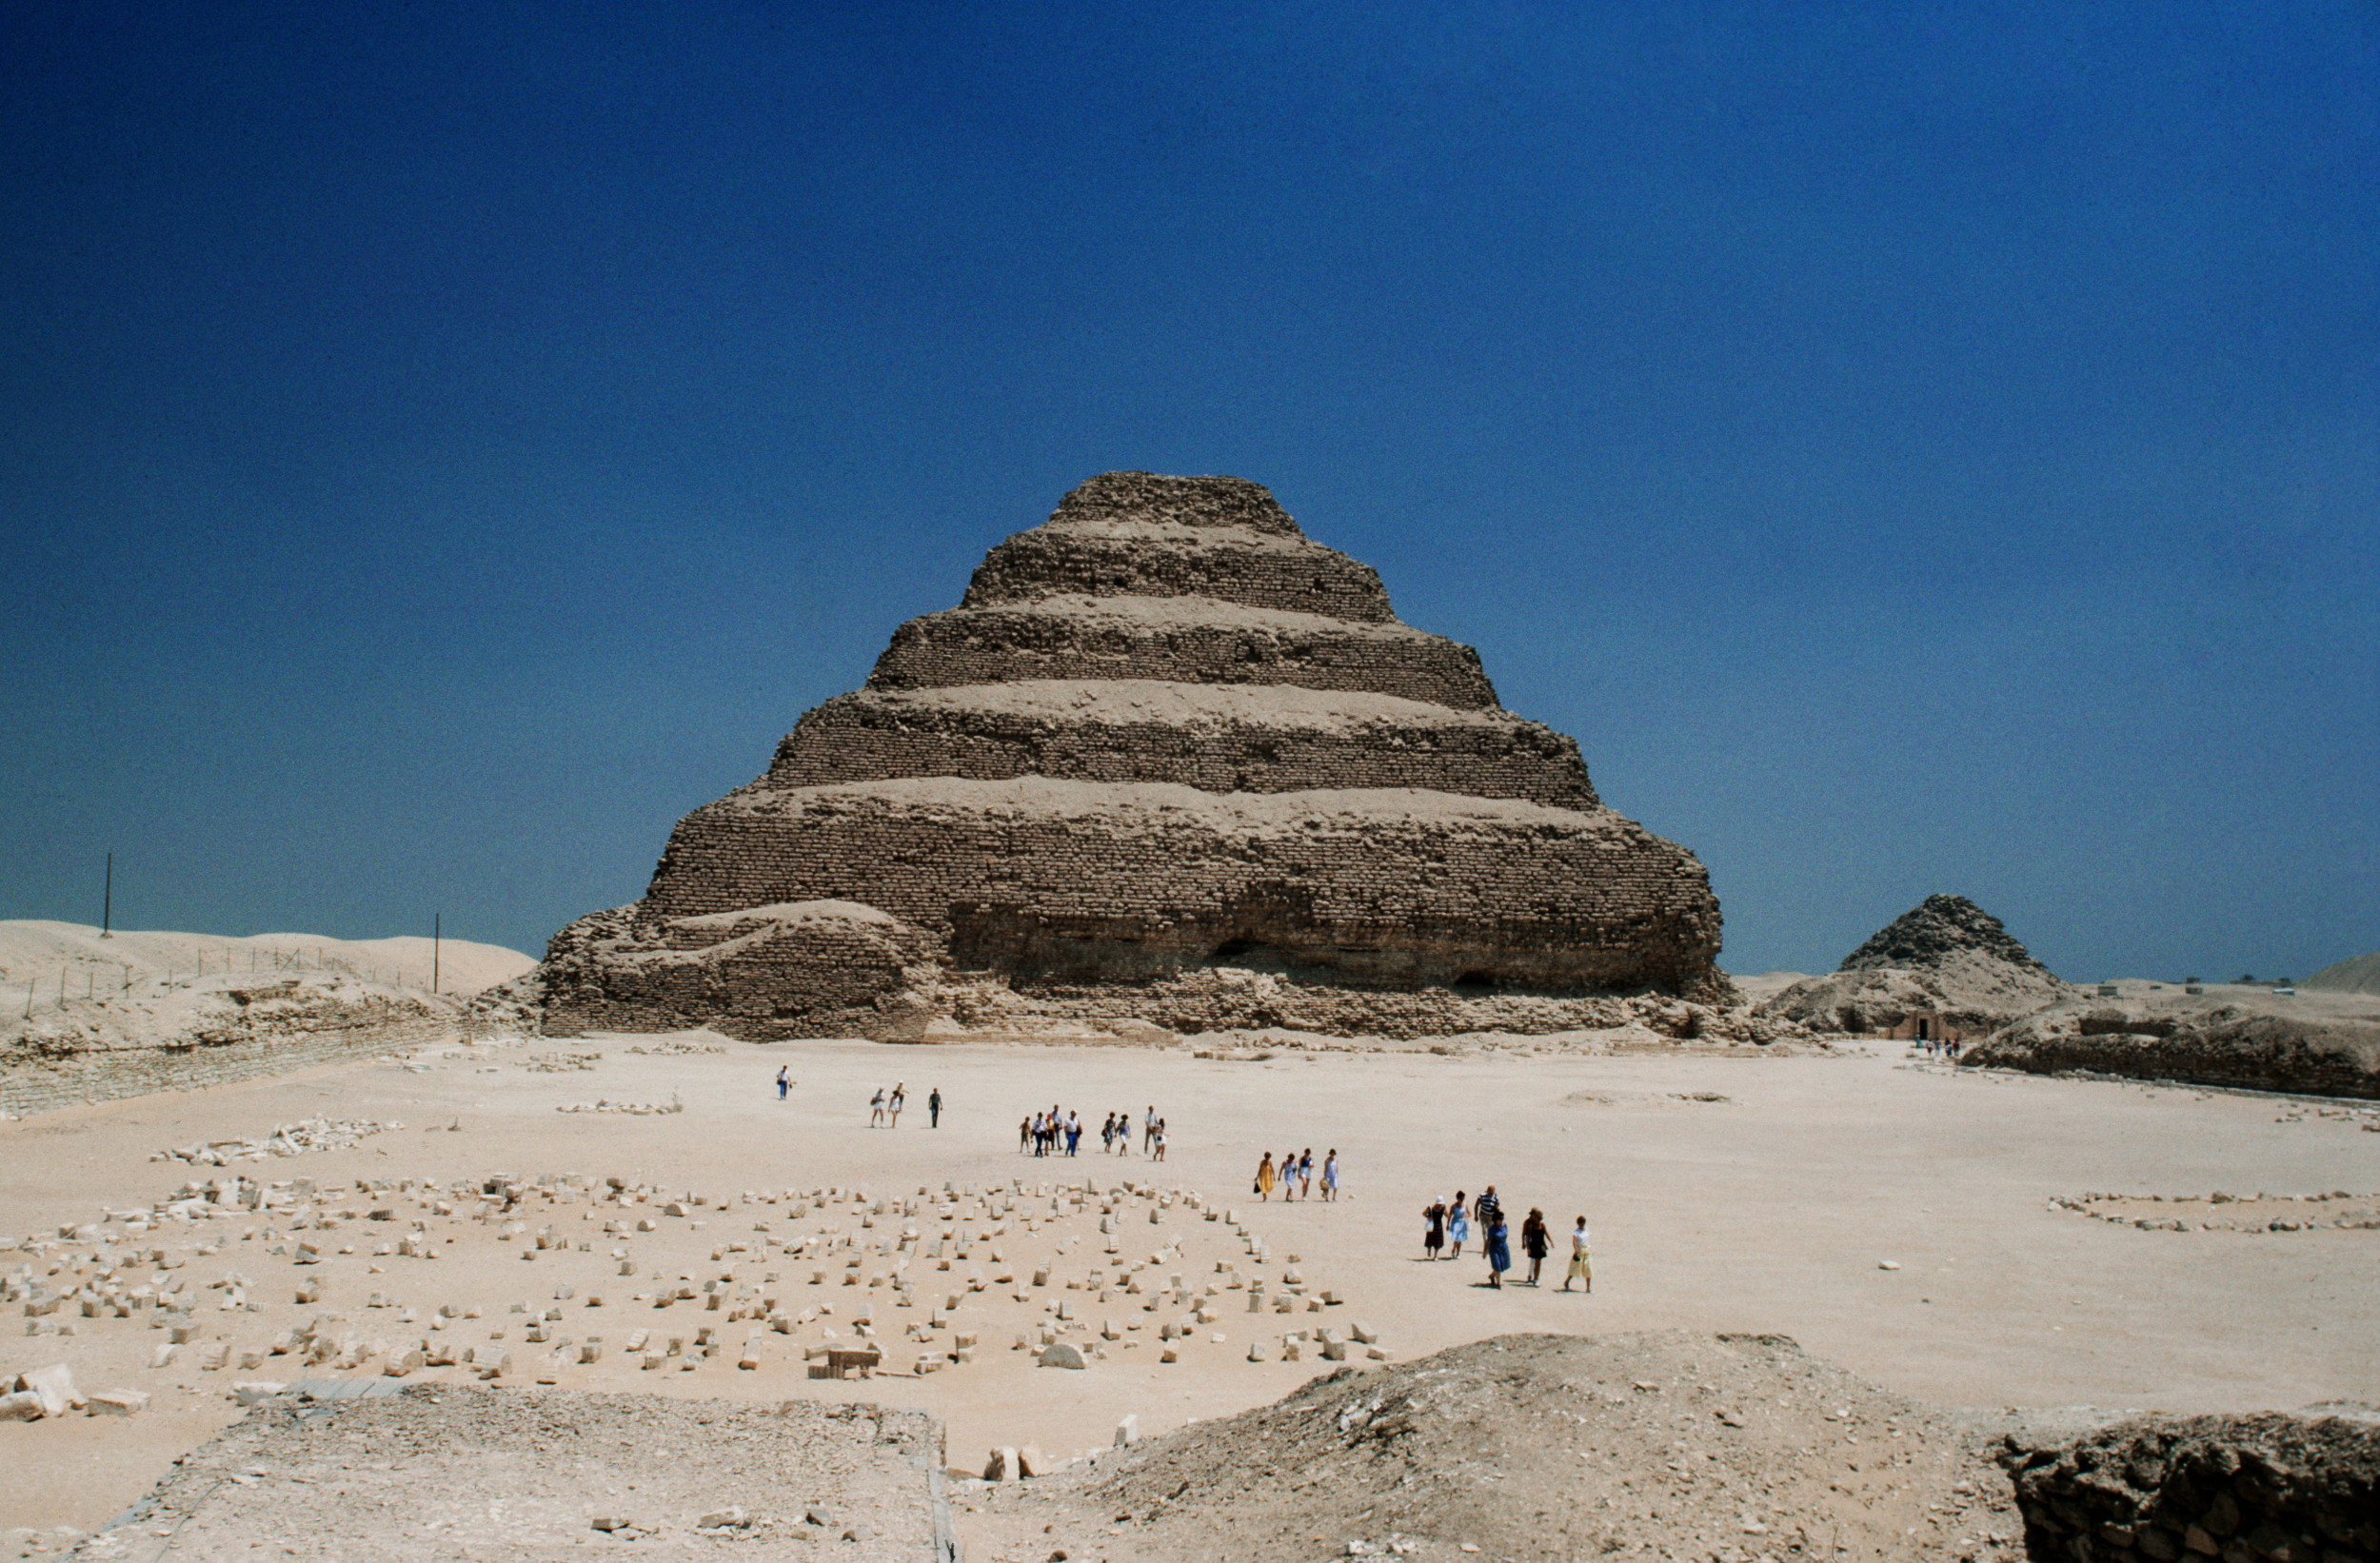 Ancient Egypts Oldest Pyramid Has Enormous Moat To Guide Dead Pharaoh